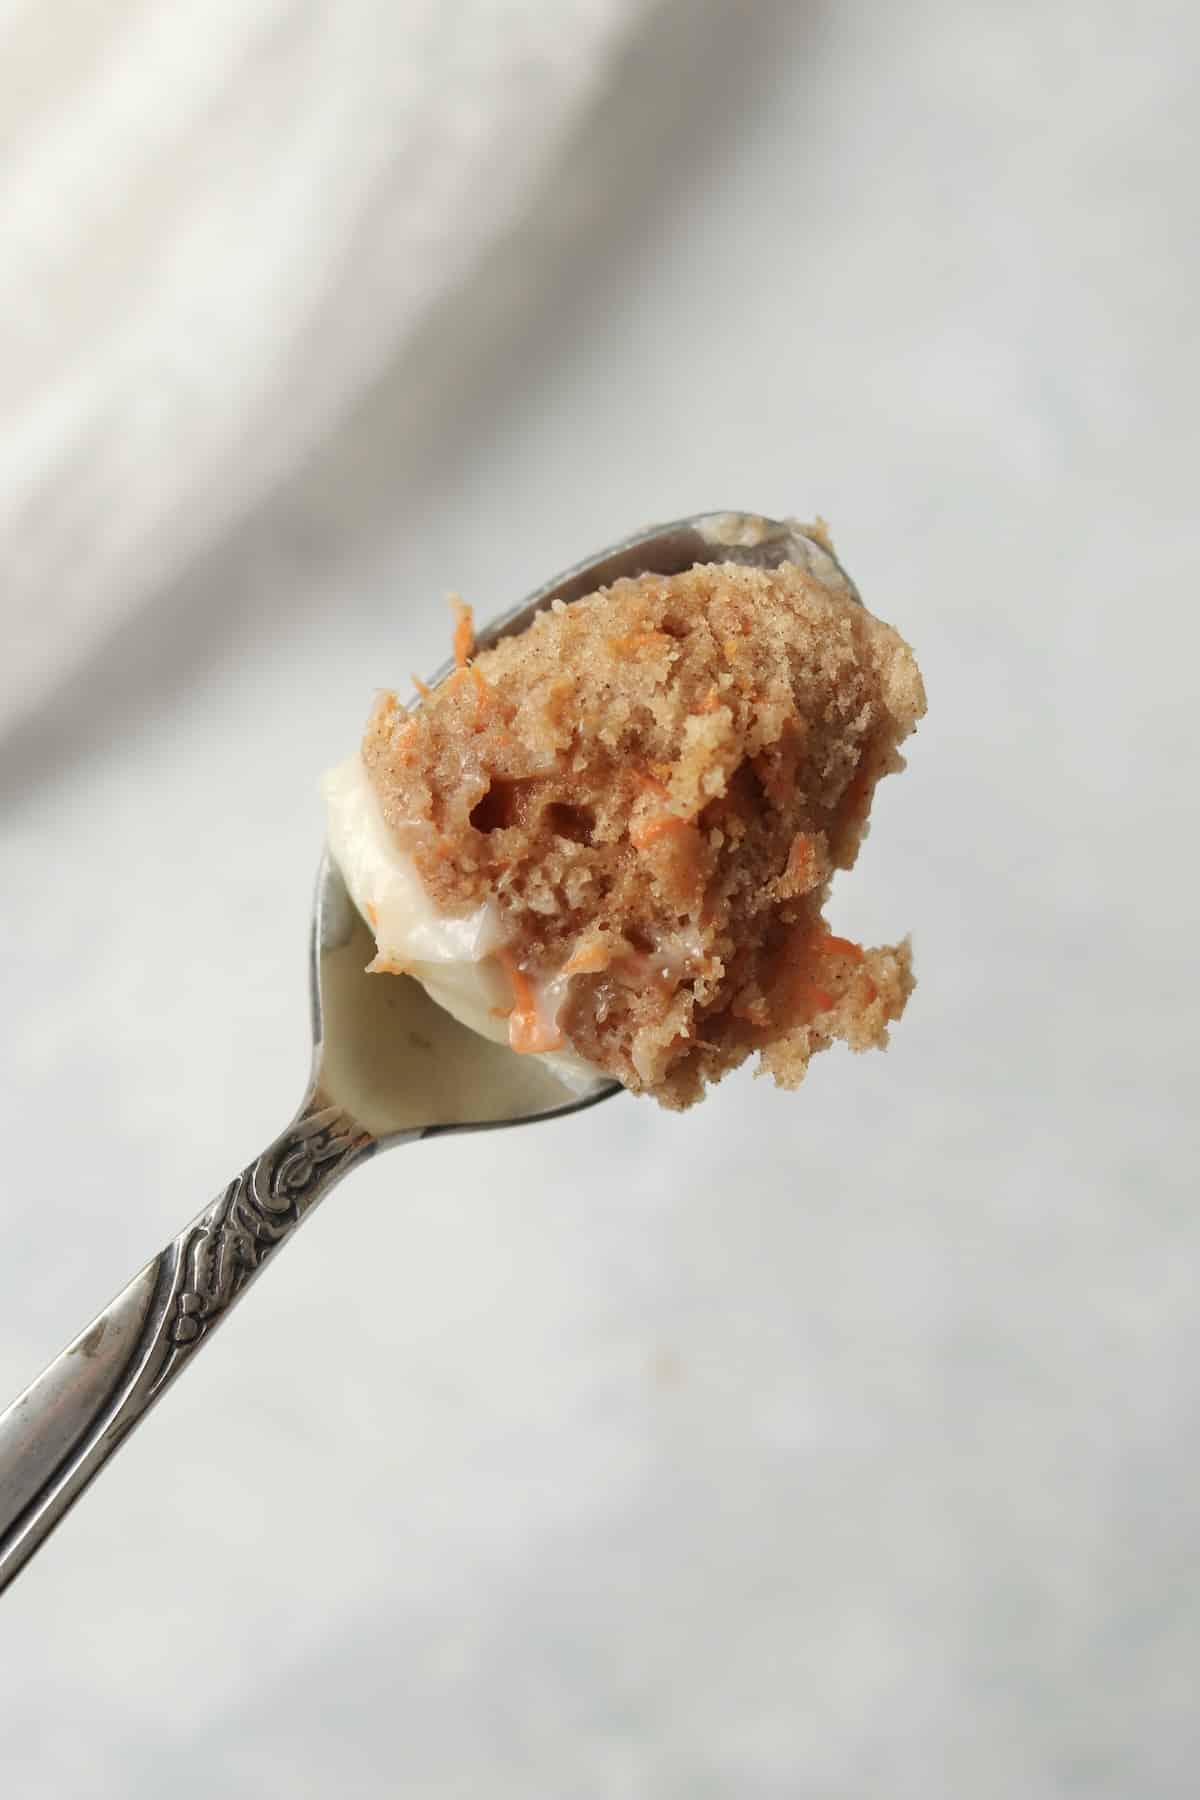 spoon holding bite of carrot cake that shows the grated carrots